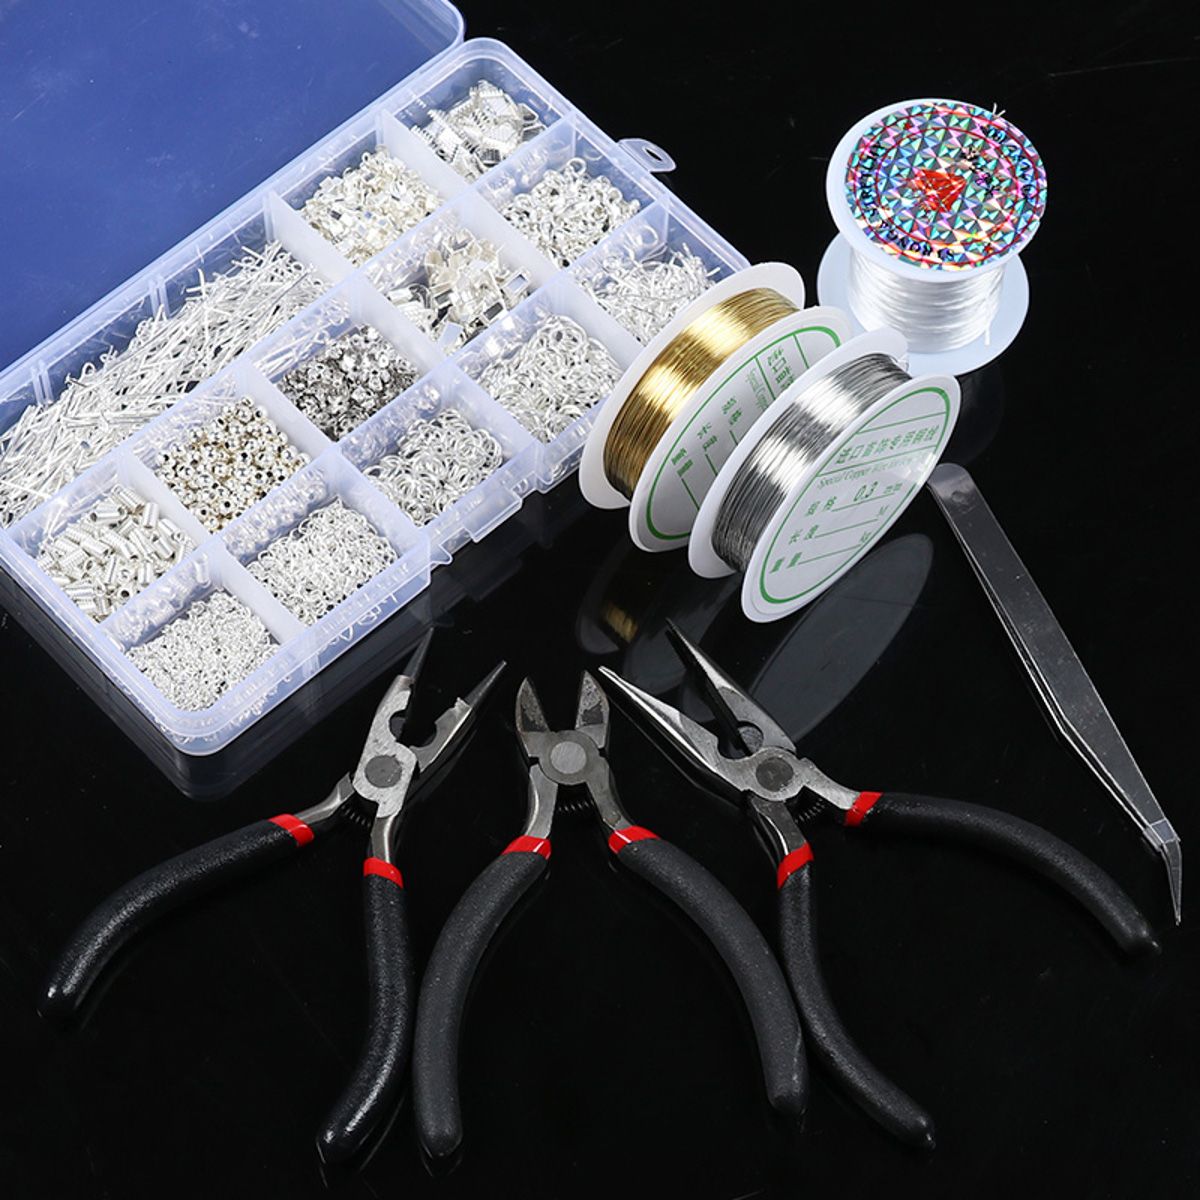 Jewelry-Making-Wire-Starter-Threads-Findings-Pliers-Repair-Tool-Craft-Supply-Kit-1693573